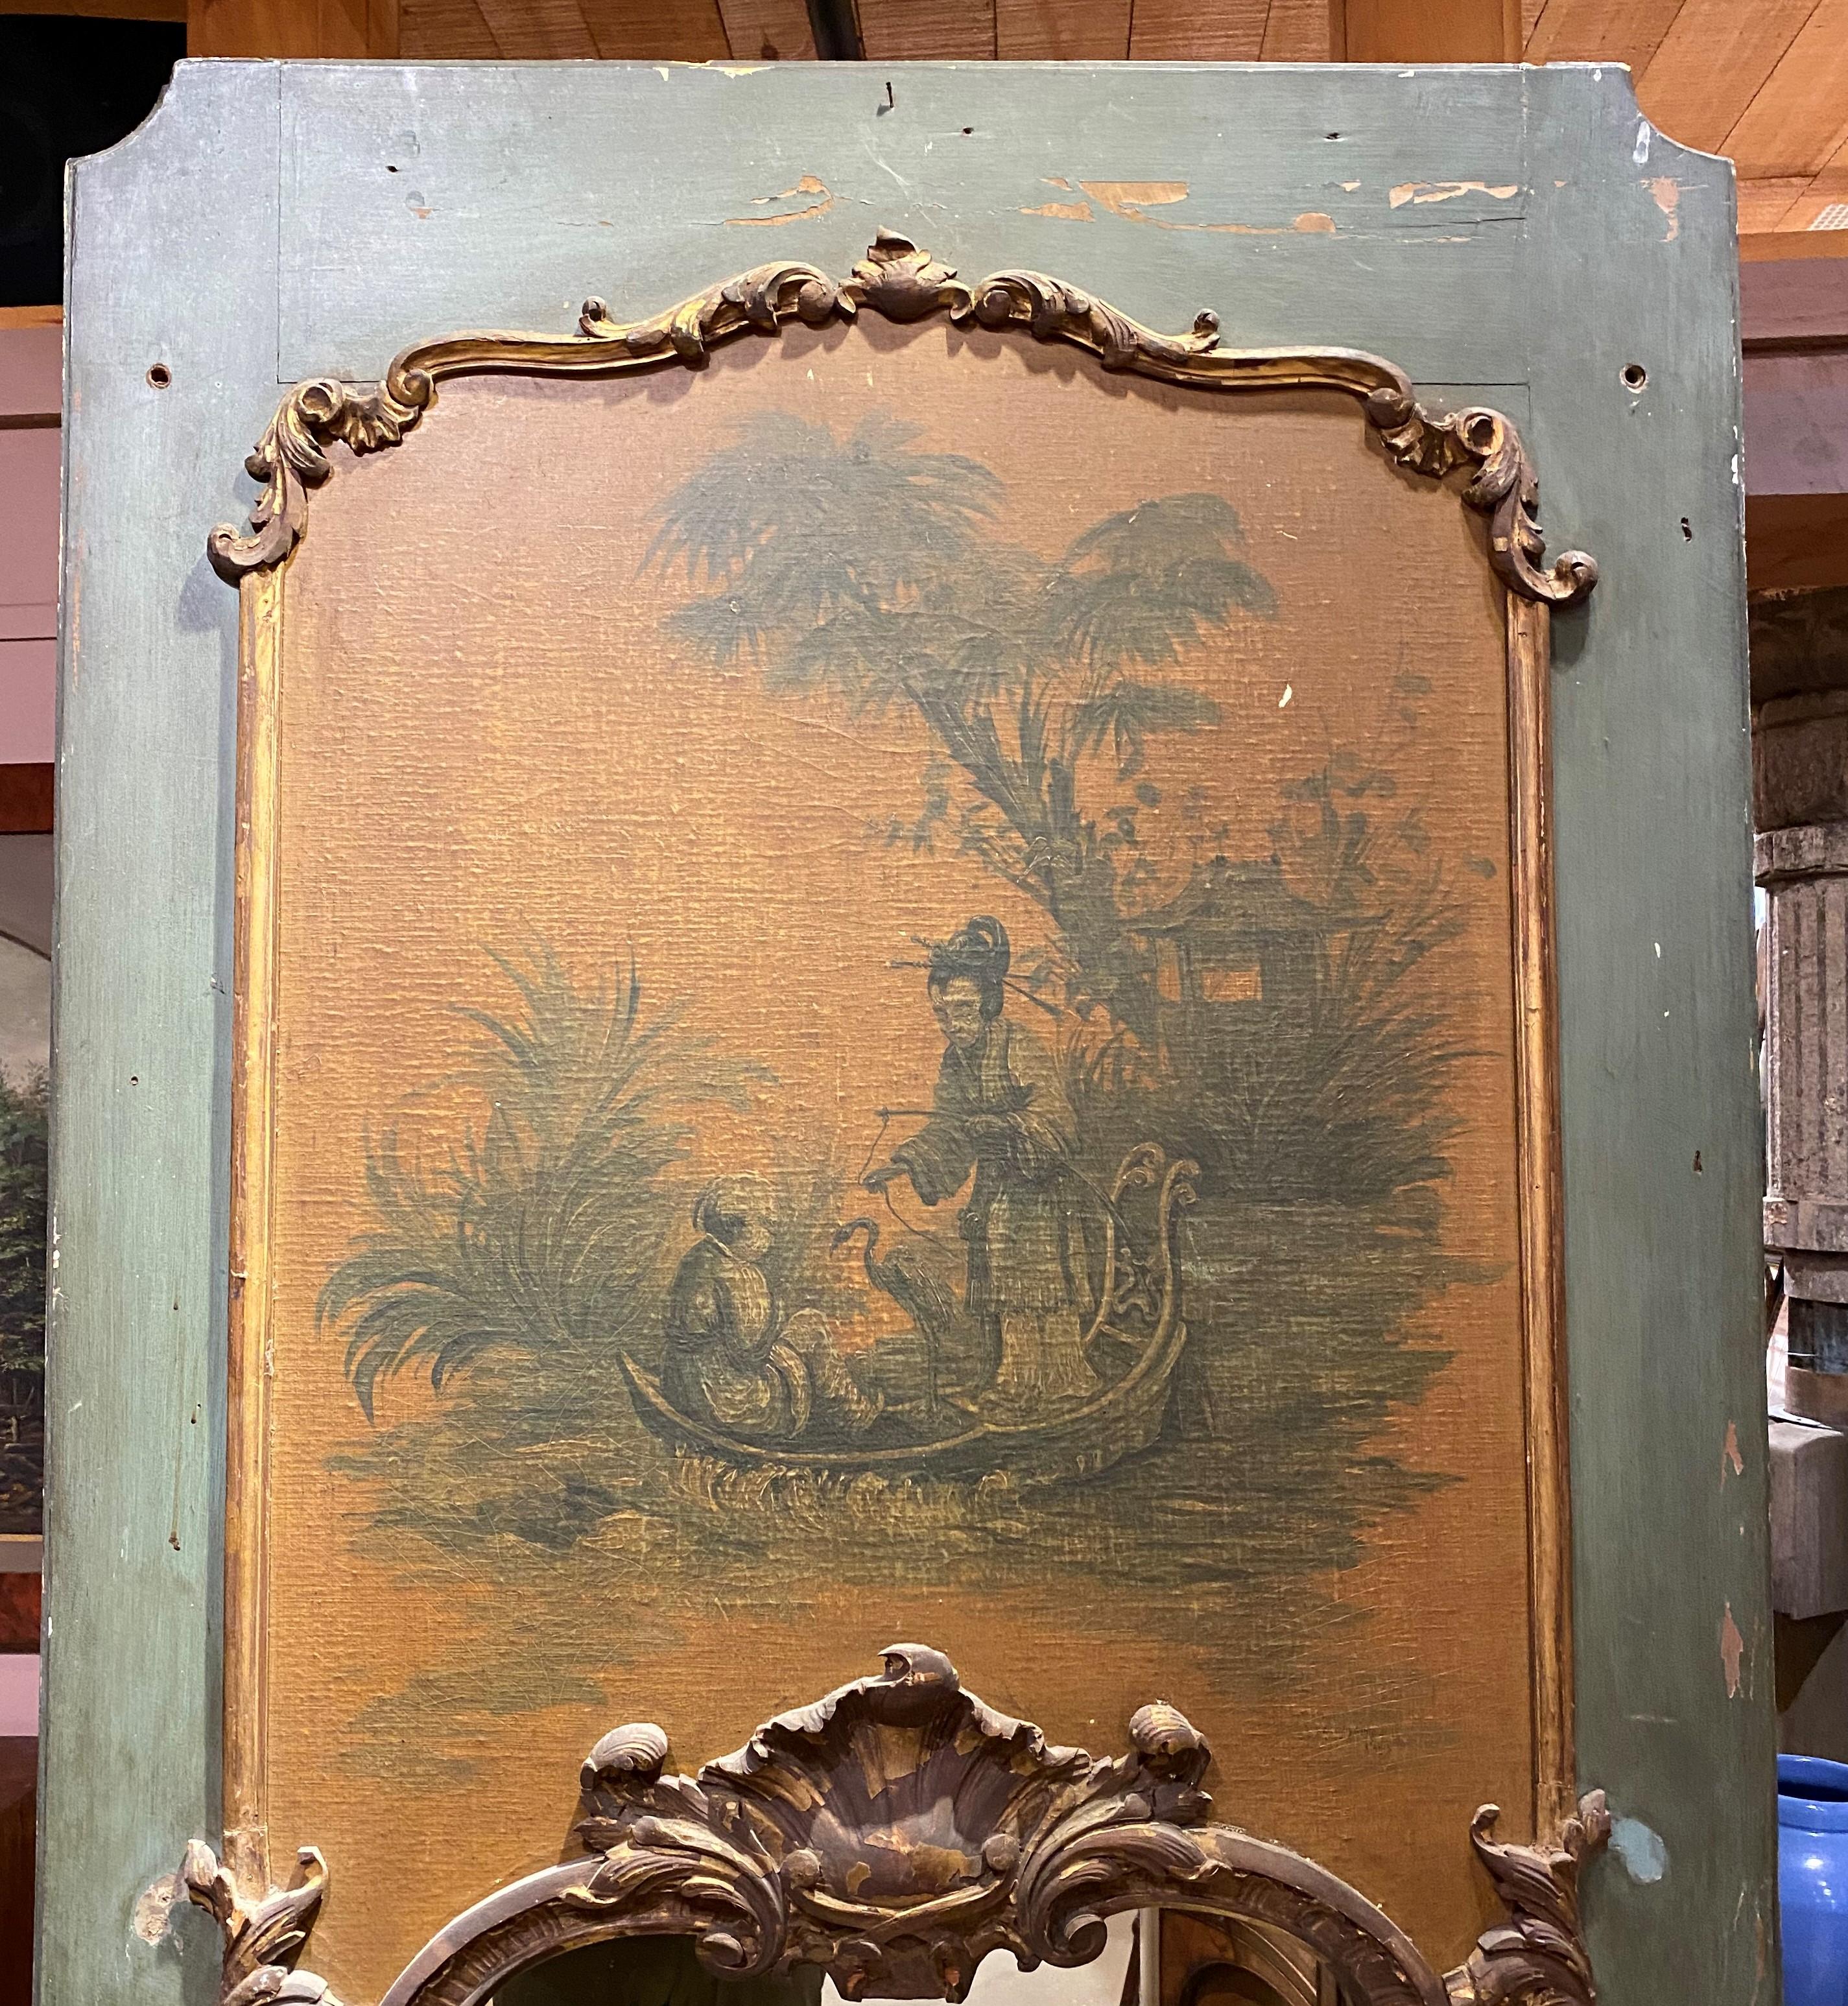 A beautiful French style trumeau mirror with gilt Rococo scroll carving, its upper chinoiserie panel painted with figures in a boat, all with a muted green panel surround. Dates to the 19th century in very good overall condition, with overall gilt